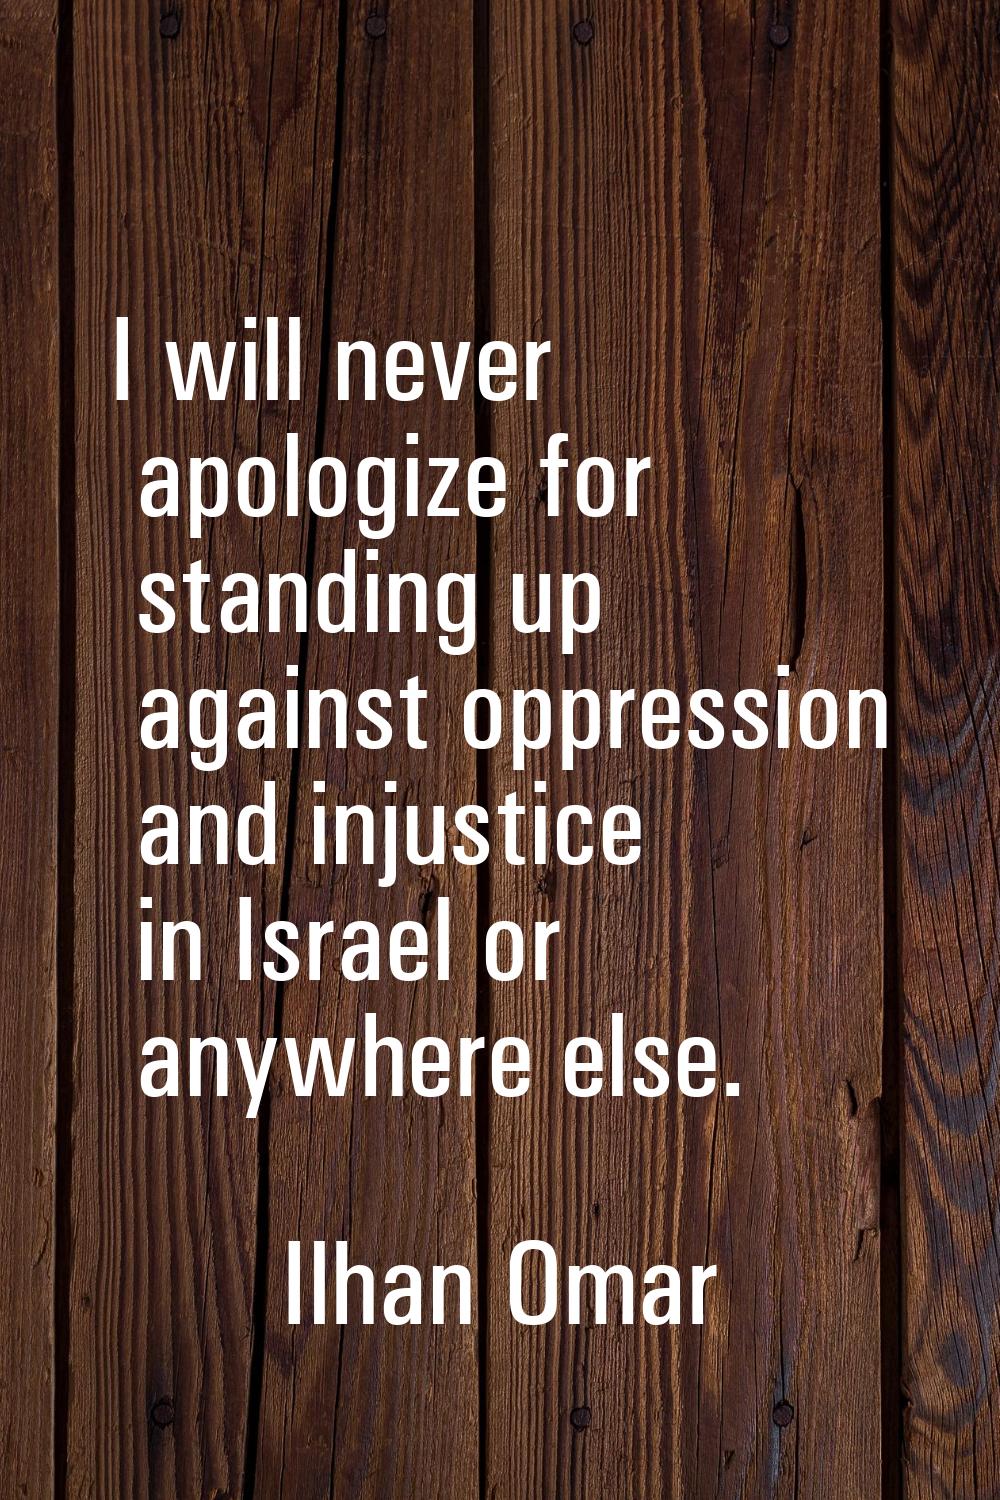 I will never apologize for standing up against oppression and injustice in Israel or anywhere else.